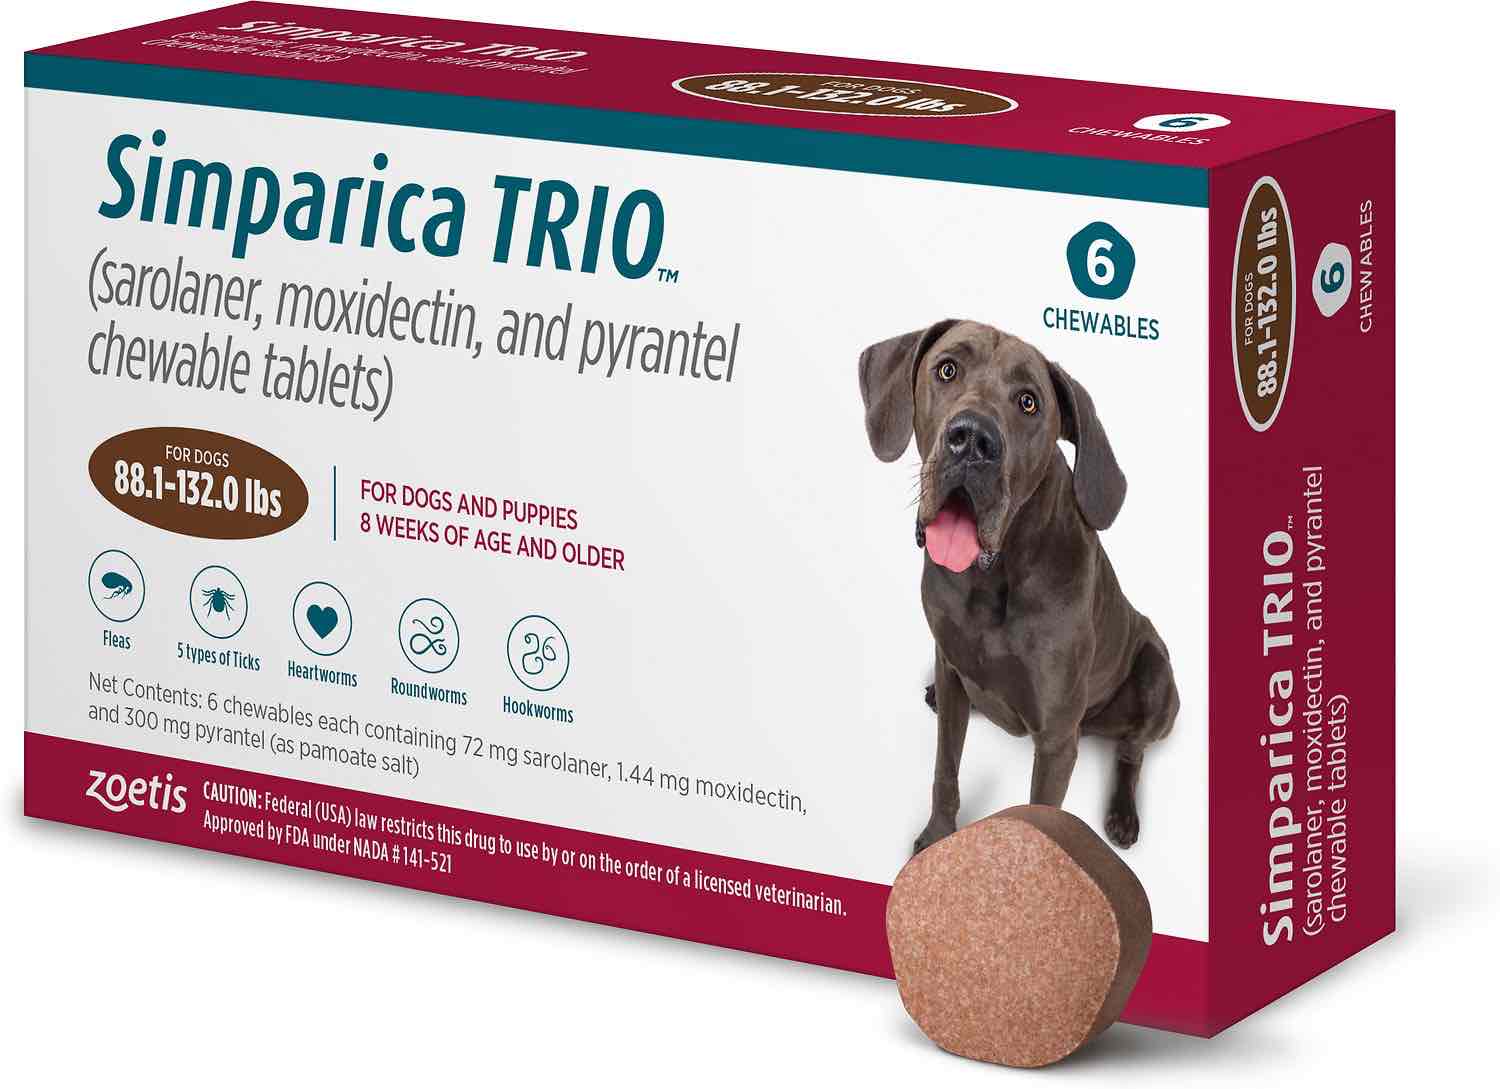 Simparica Trio 6 chewable tablets for dogs 88.1-132 lbs (Brown) 1